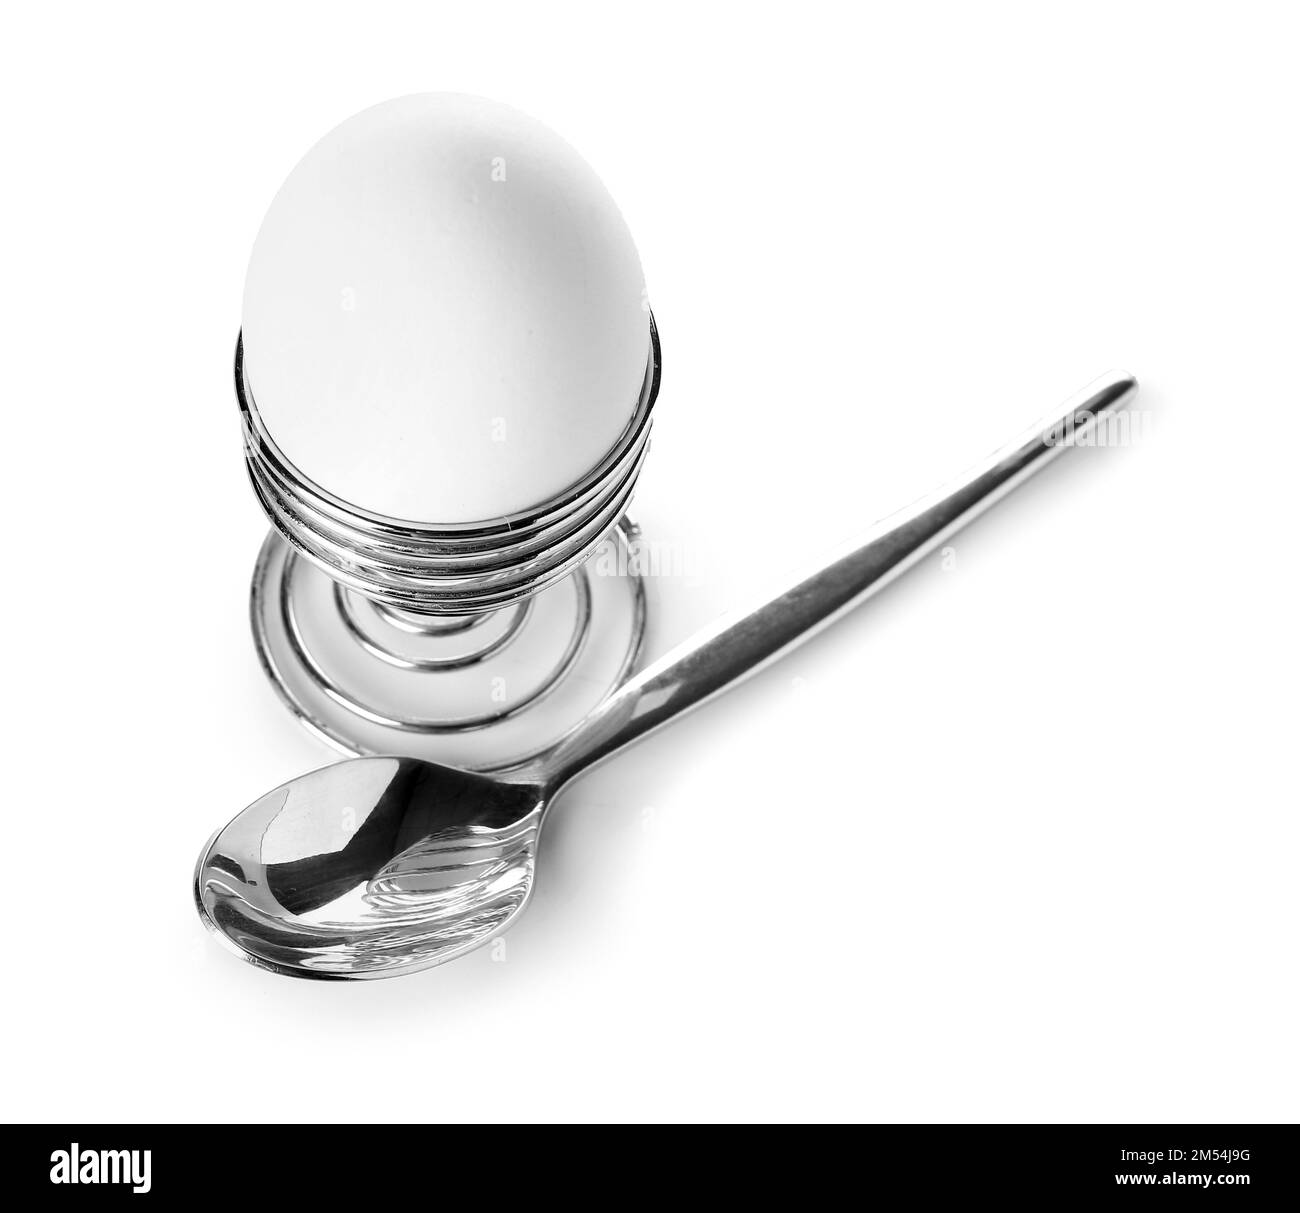 Egg in holder and spoon on white background Stock Photo